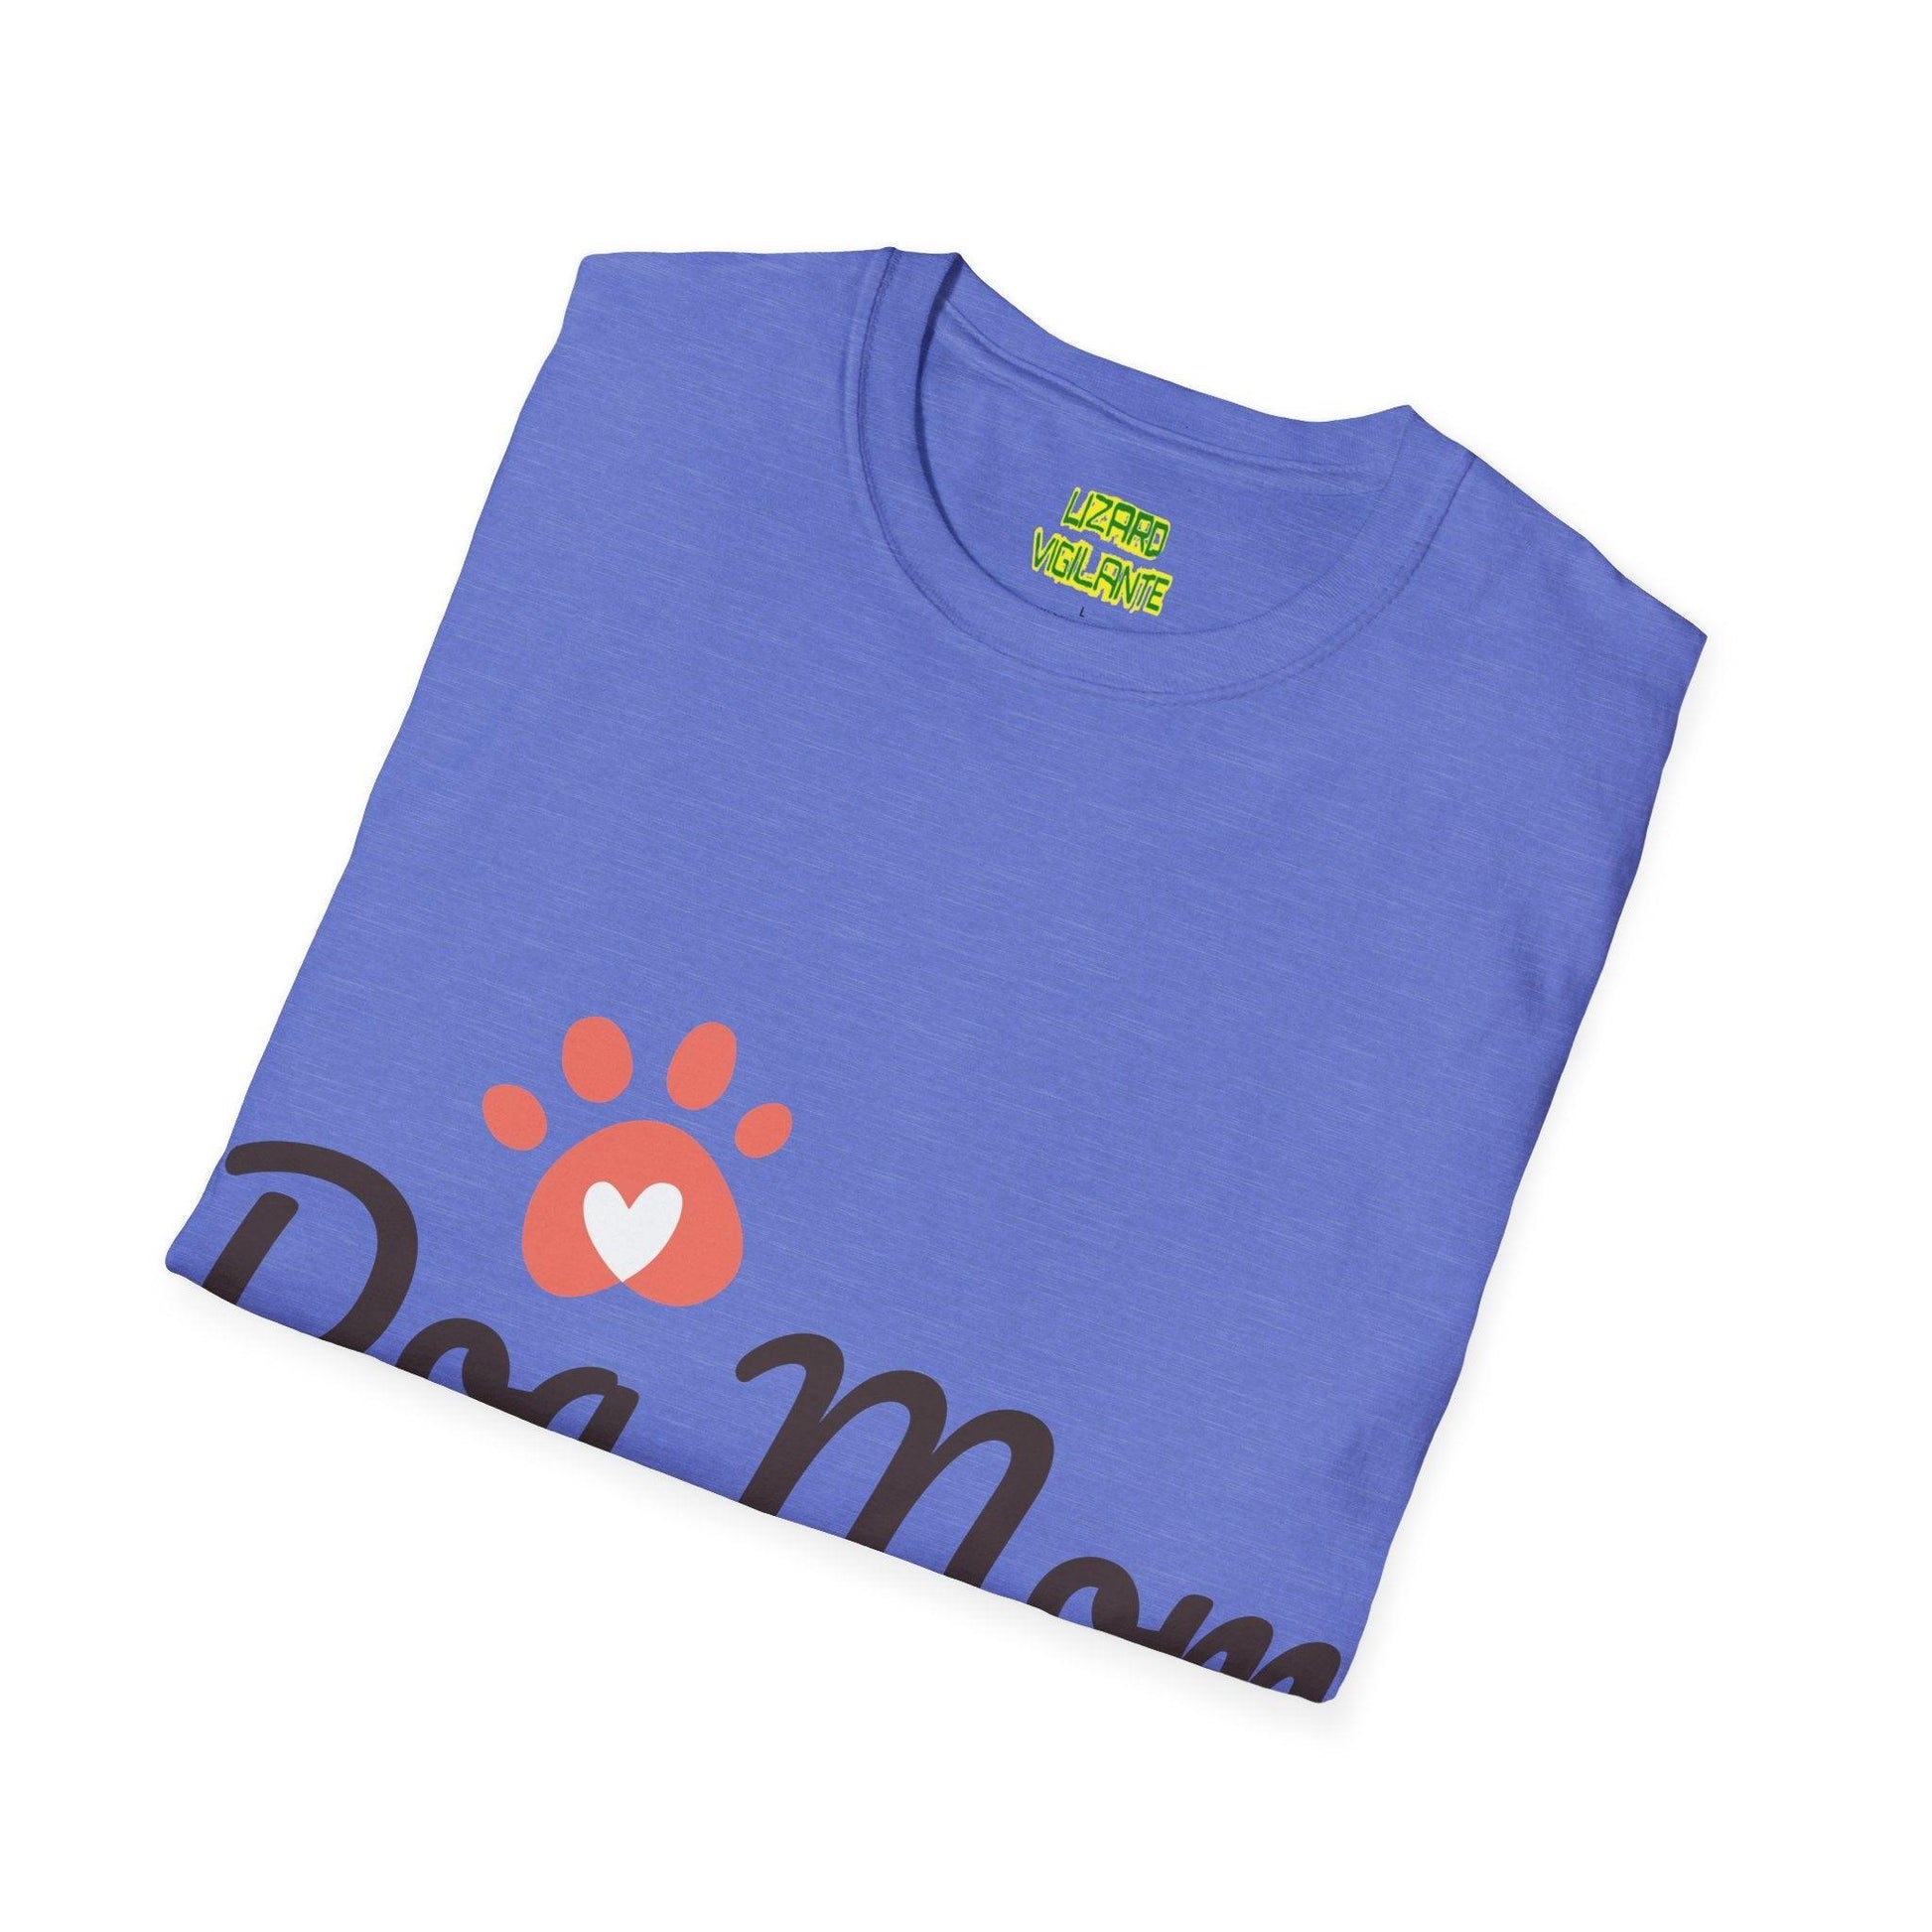 Dog Mom with Paw and a Heart in it Graphic Unisex Softstyle T-Shirt - Lizard Vigilante